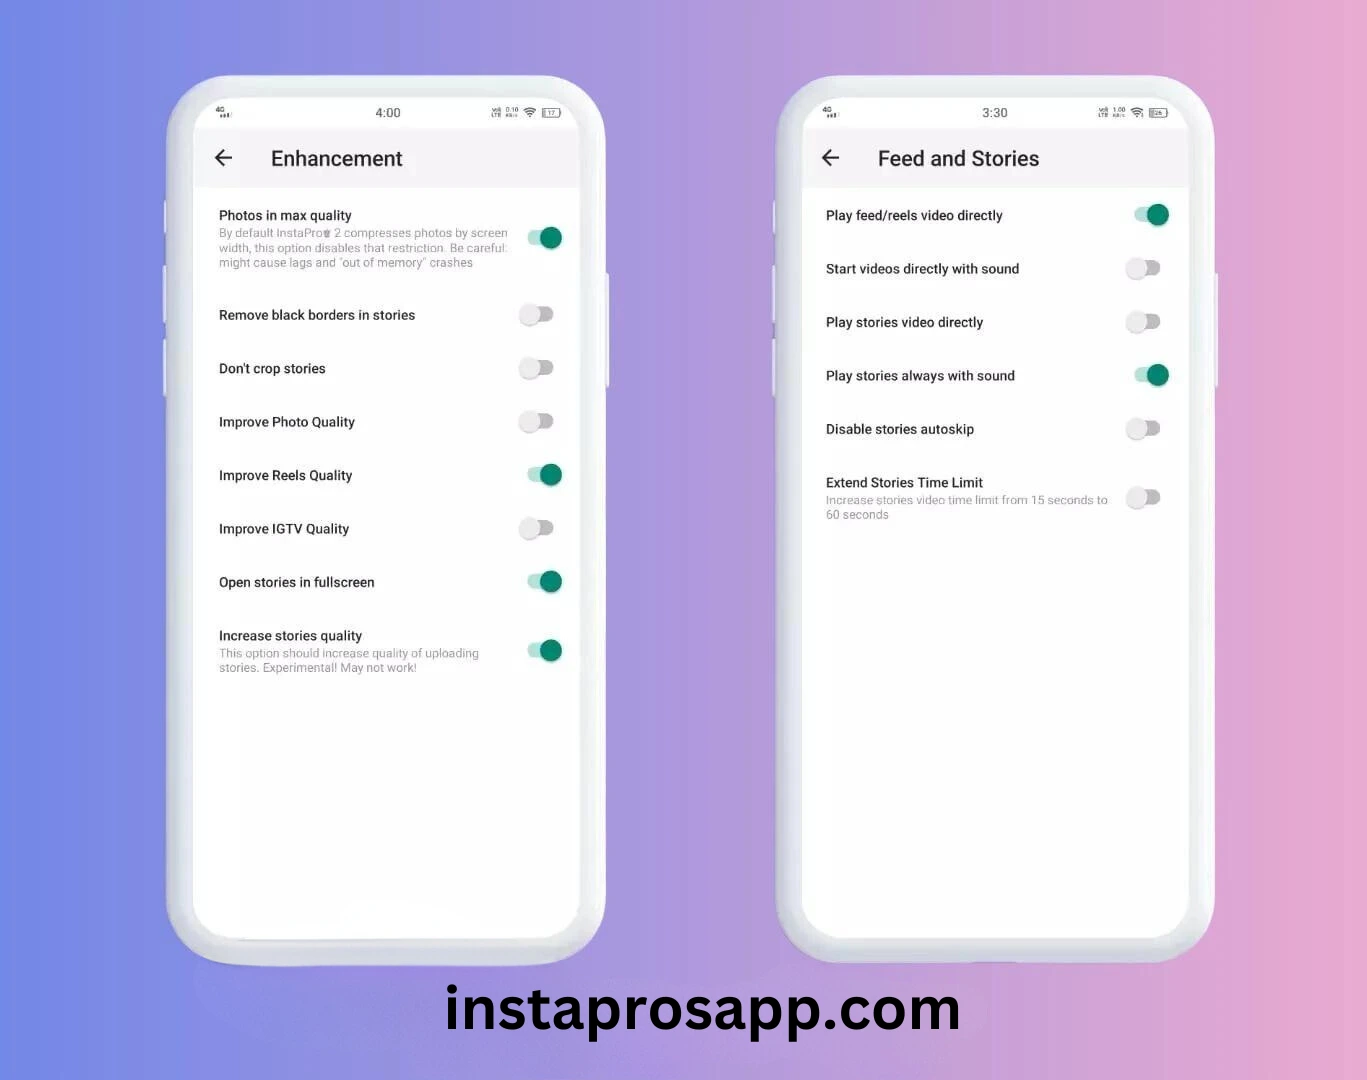 Insta Pro Apk pics with feed storie and enhancement